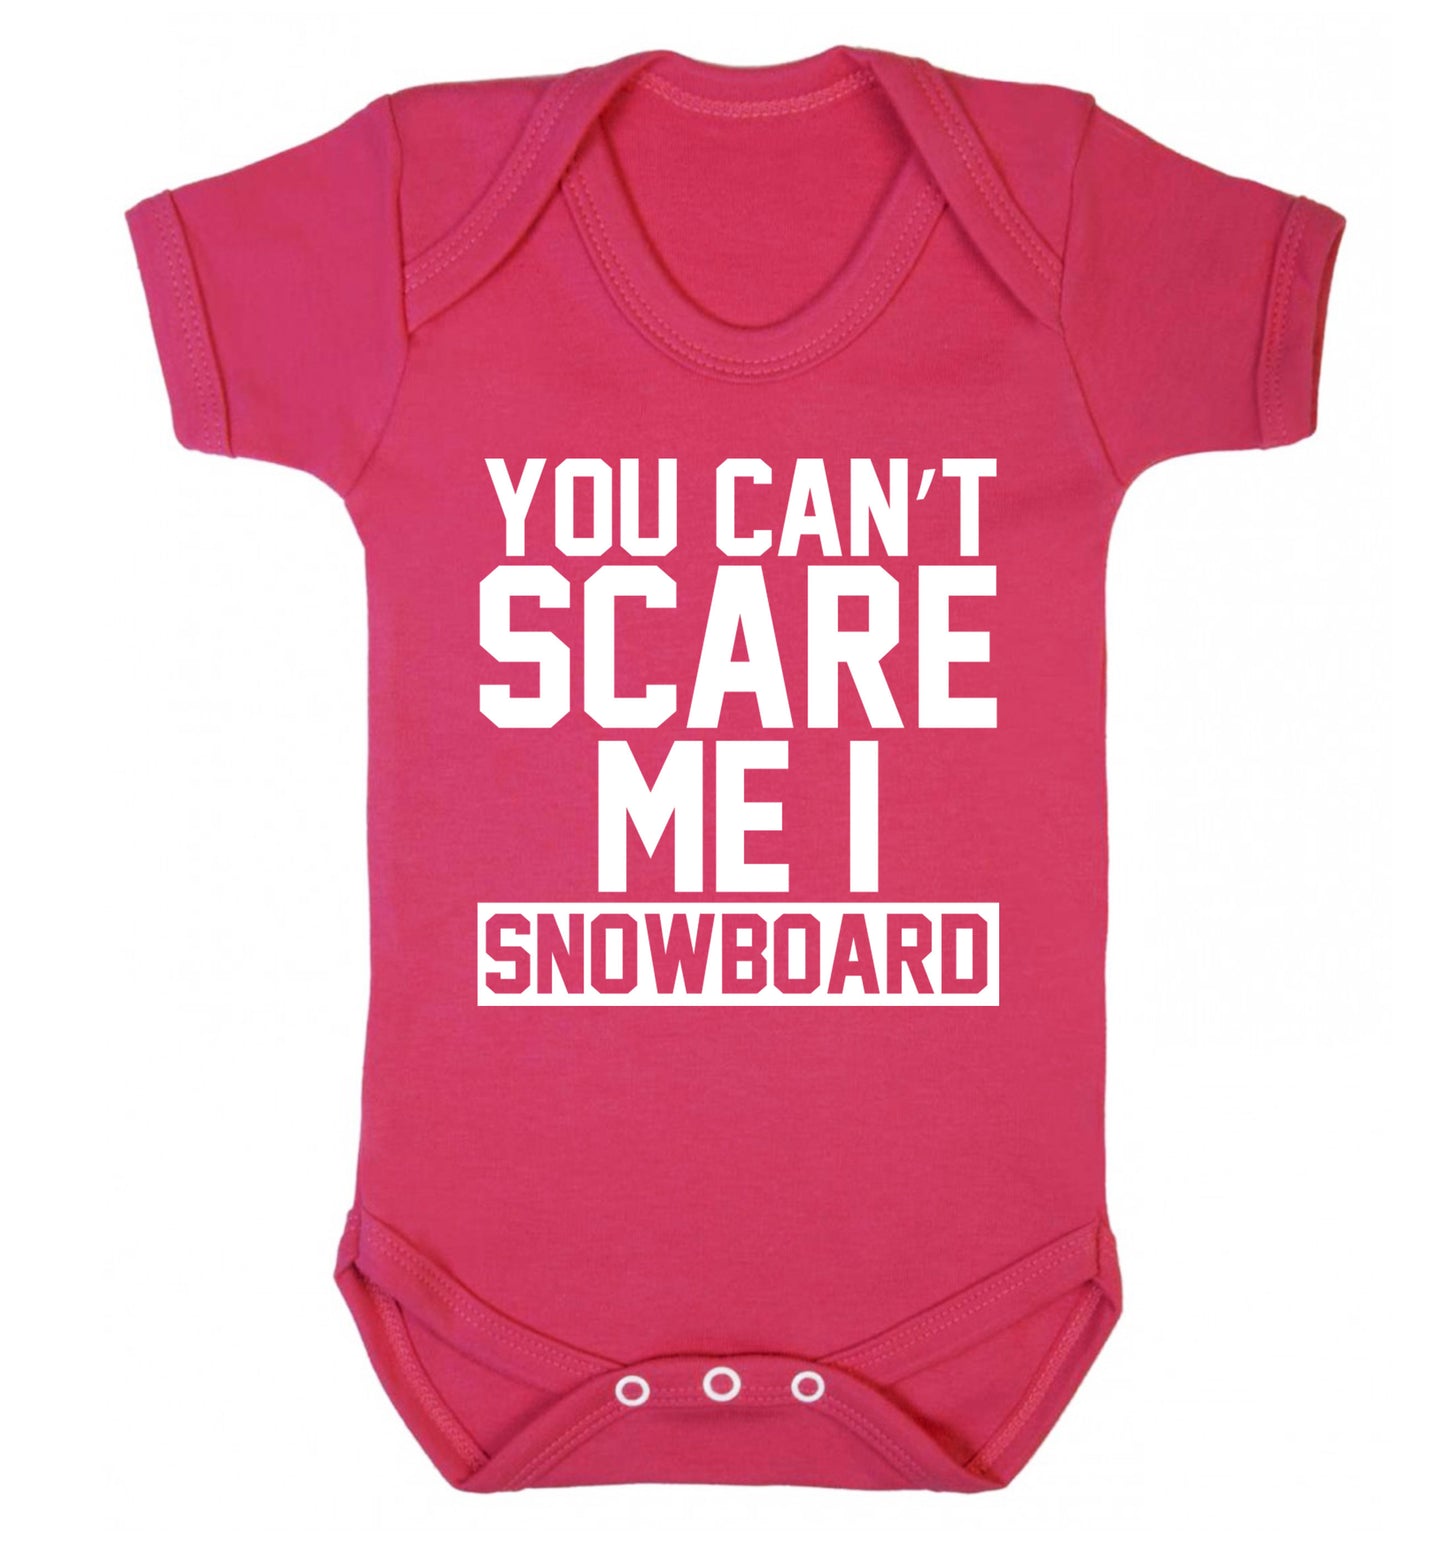 You can't scare me I snowboard Baby Vest dark pink 18-24 months